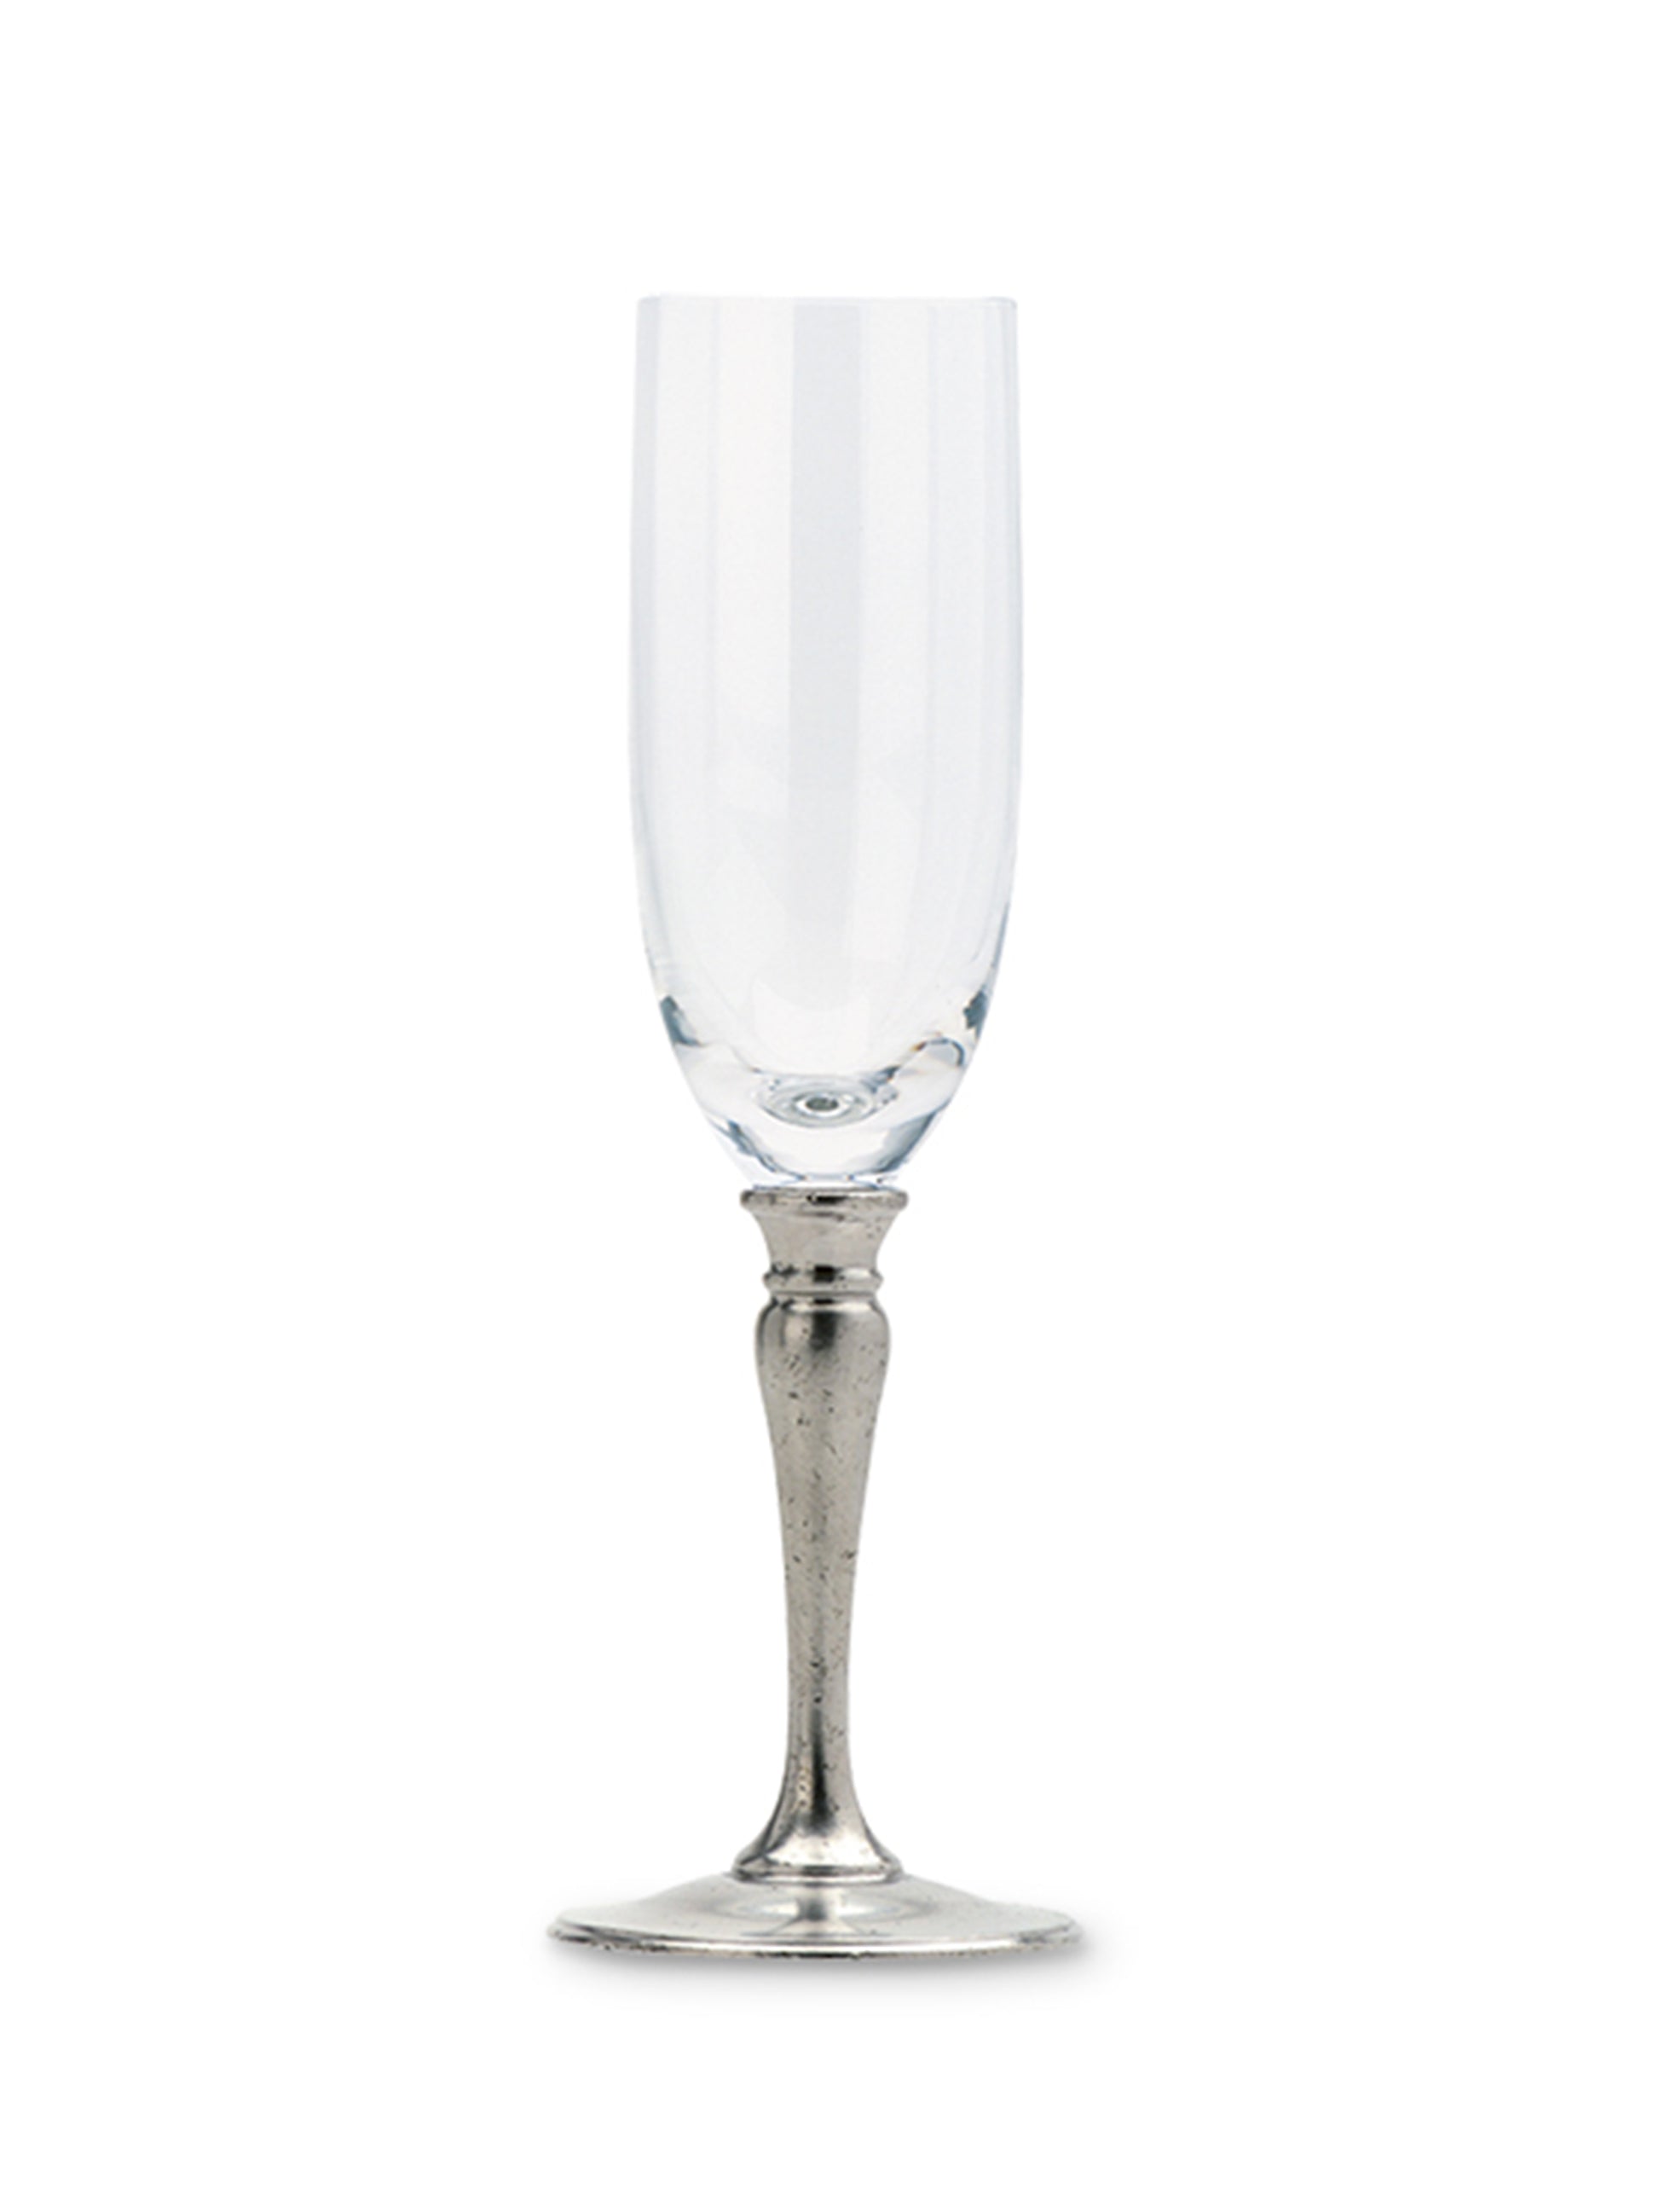 Champagne Flute - Satin Finish - Danforth Pewter - Made in USA